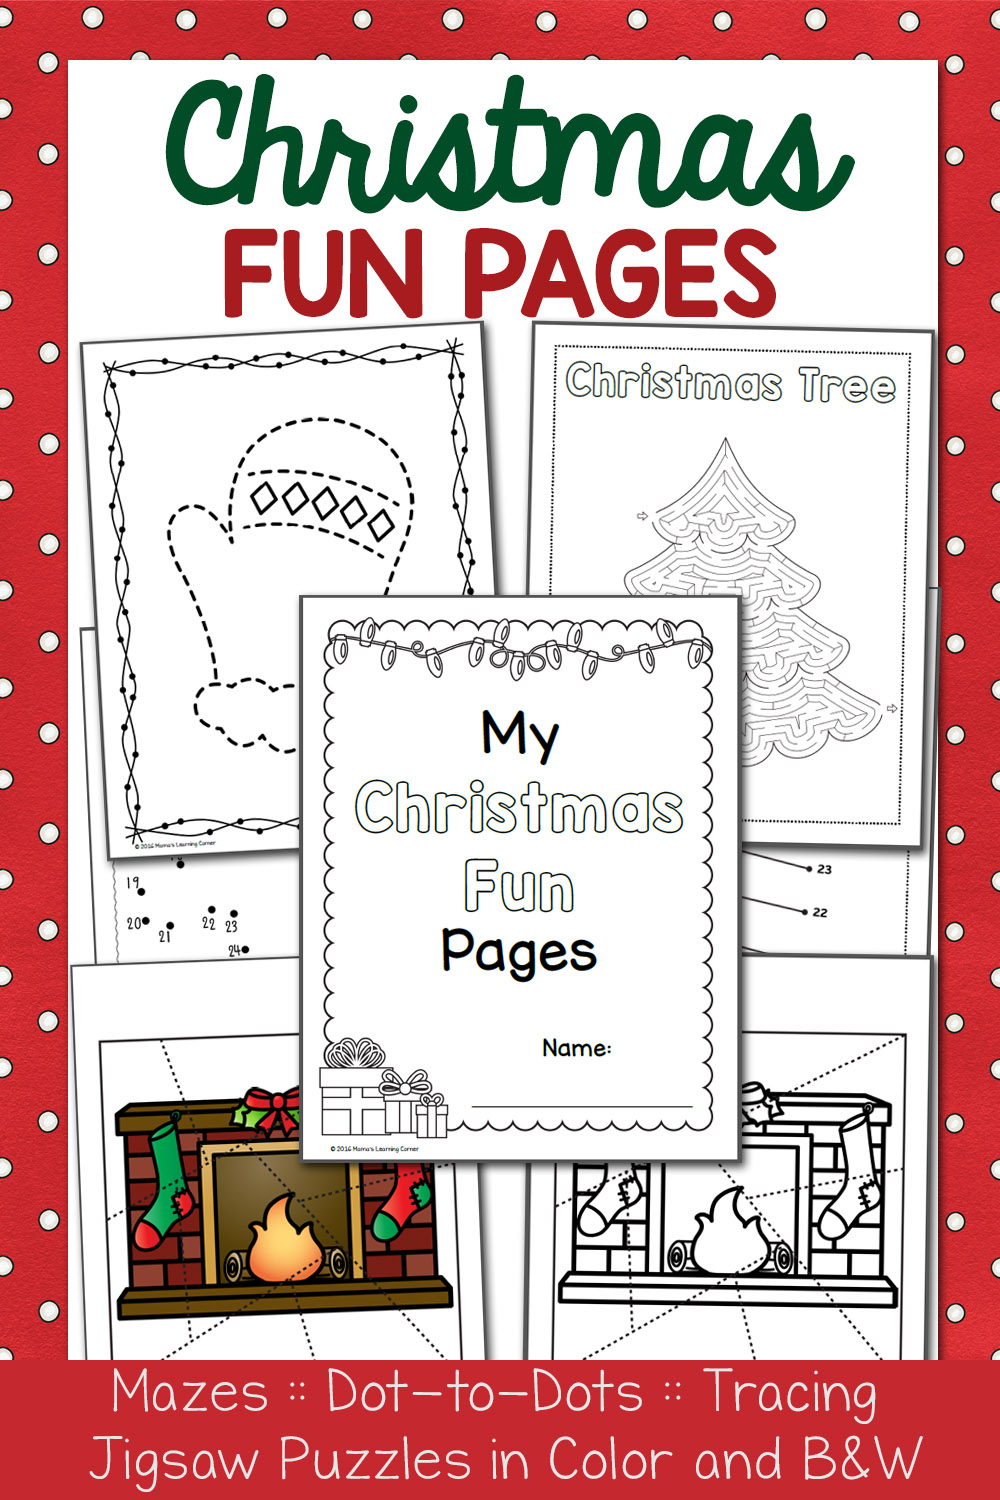 Christmas Fun Pages Packet - Dot-to-Dots, Mazes, Tracing ...